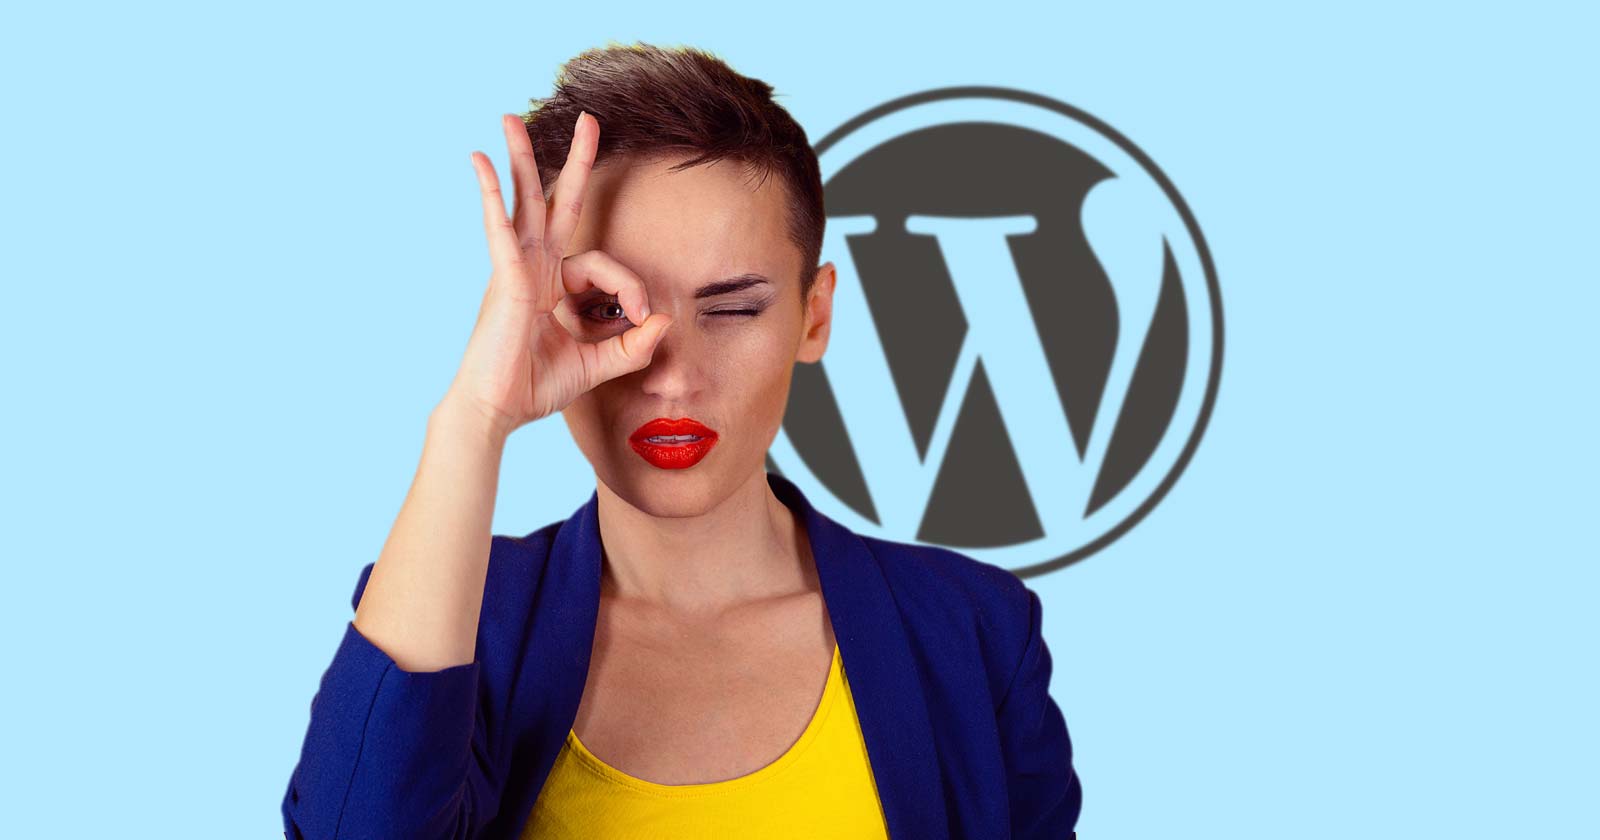 WordPress releases 6.6.1 to corrects major flaws detected in version 6.6